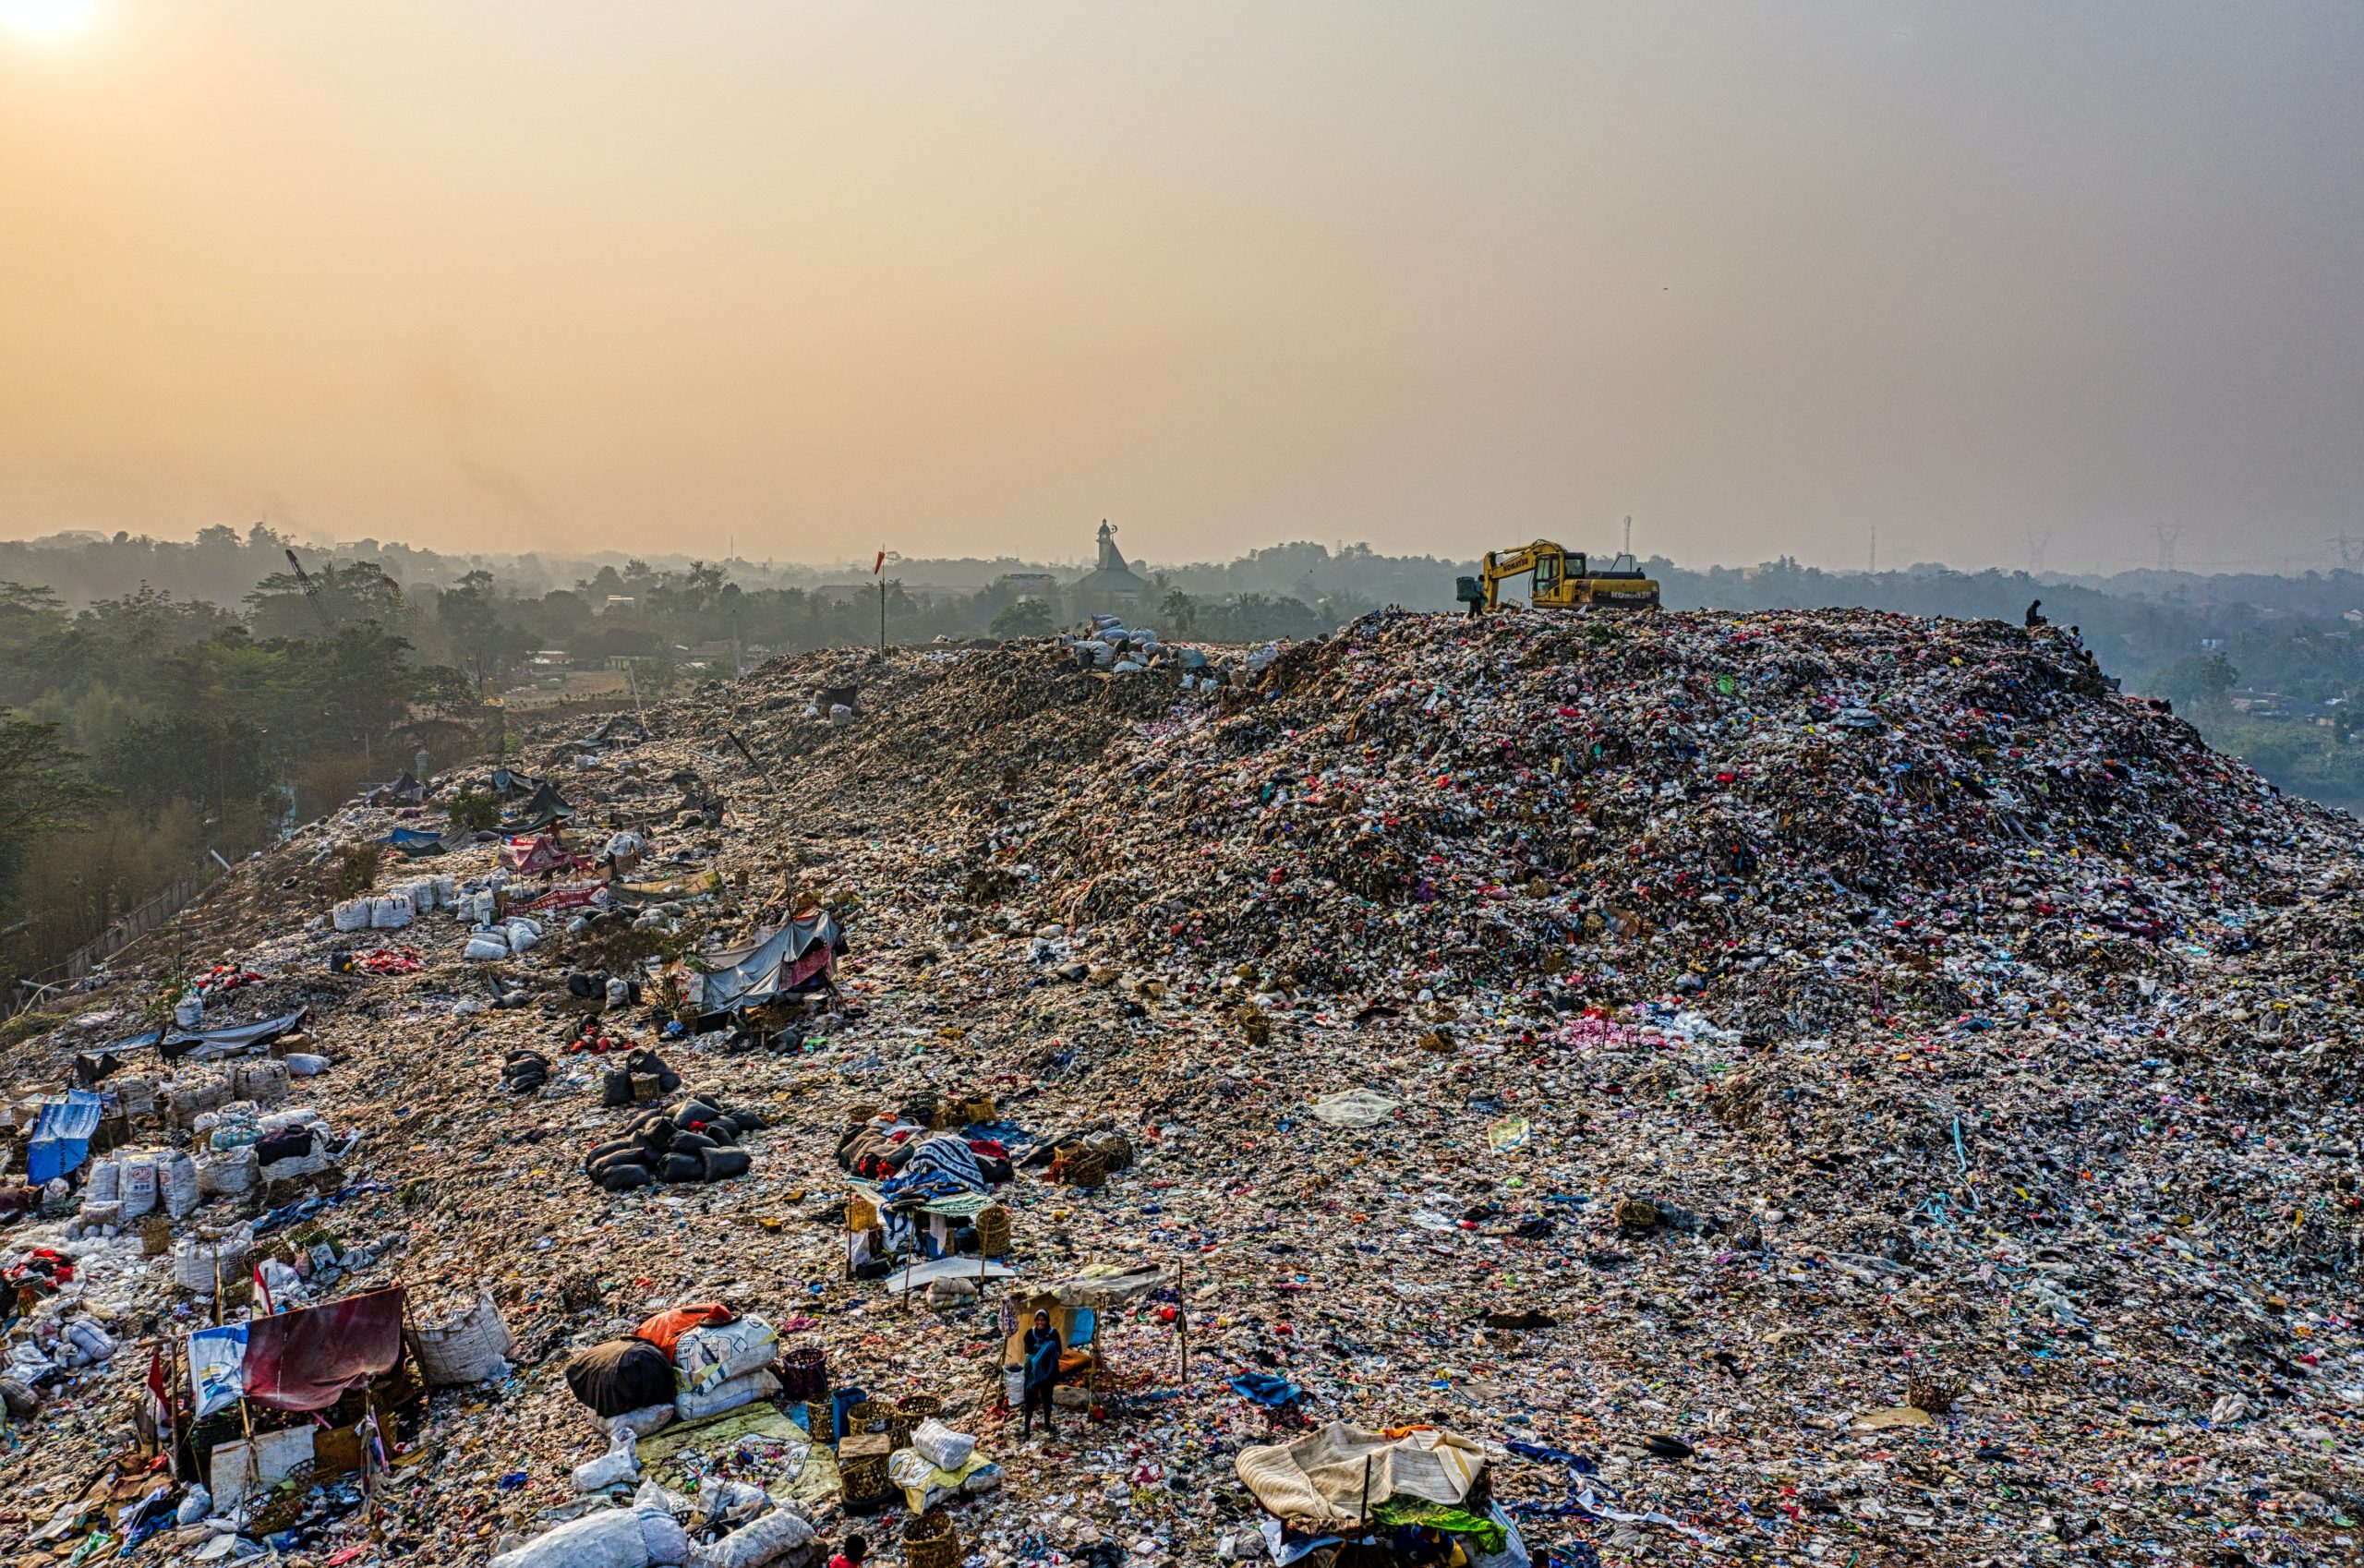 Why Is Landfill Bad For The Environment?